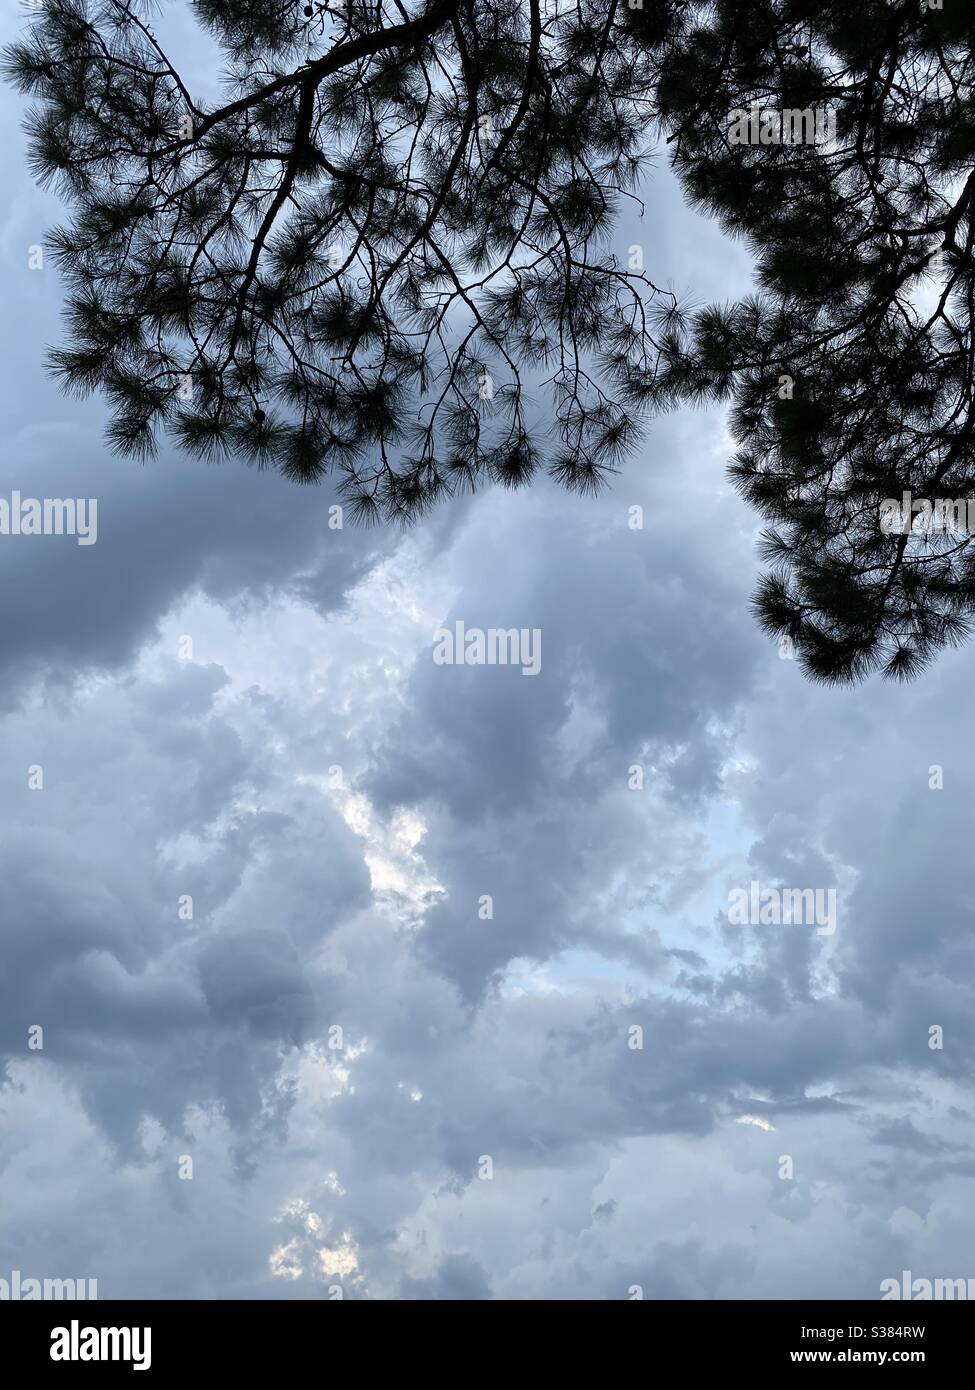 Stormy skies with pine tree branches Stock Photo